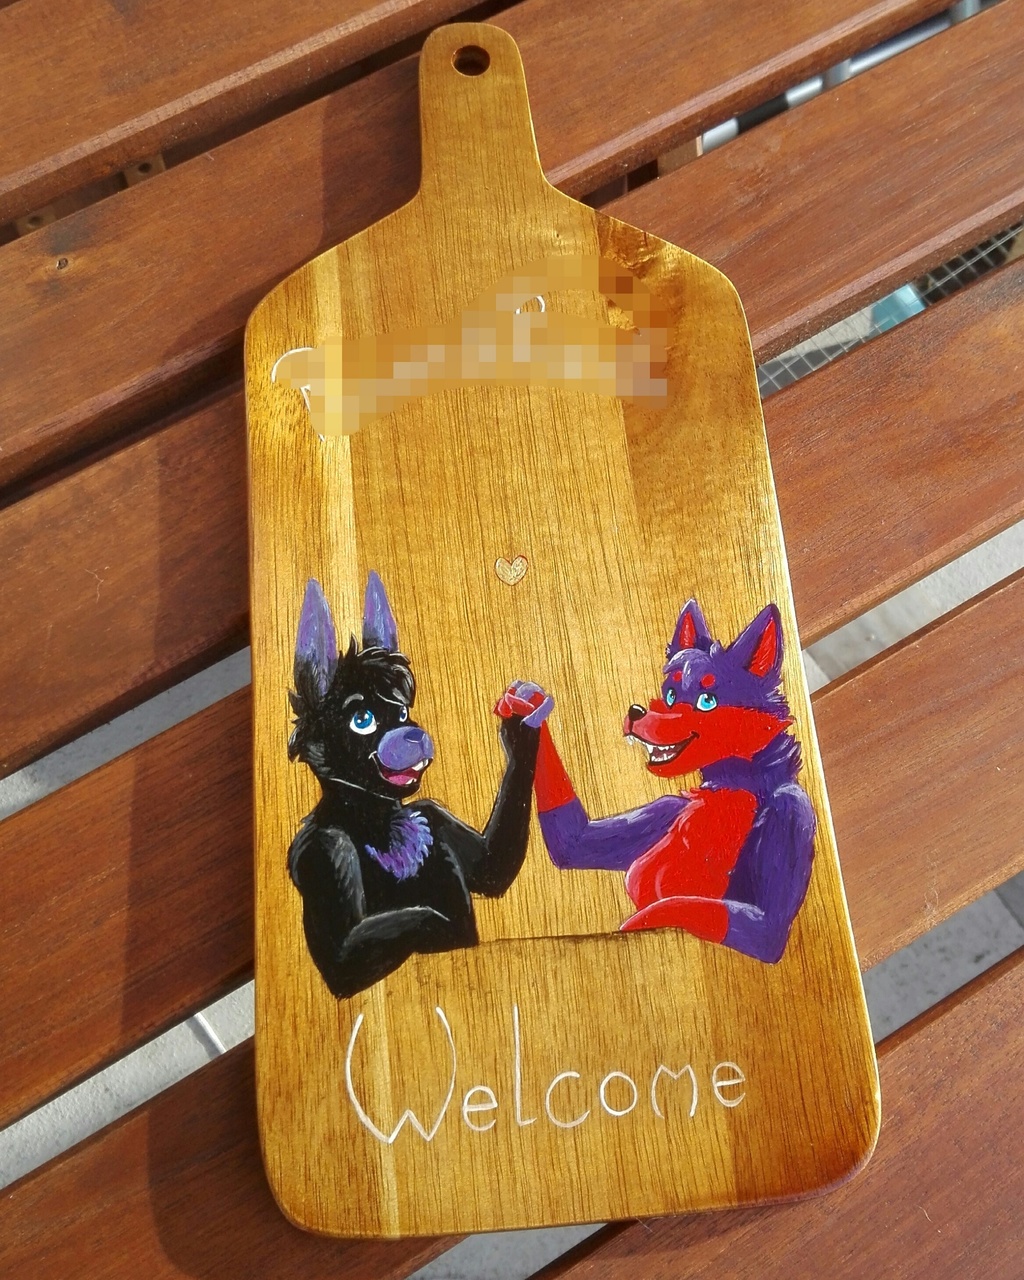 Most recent image: Dusty and Fleur welcome sign